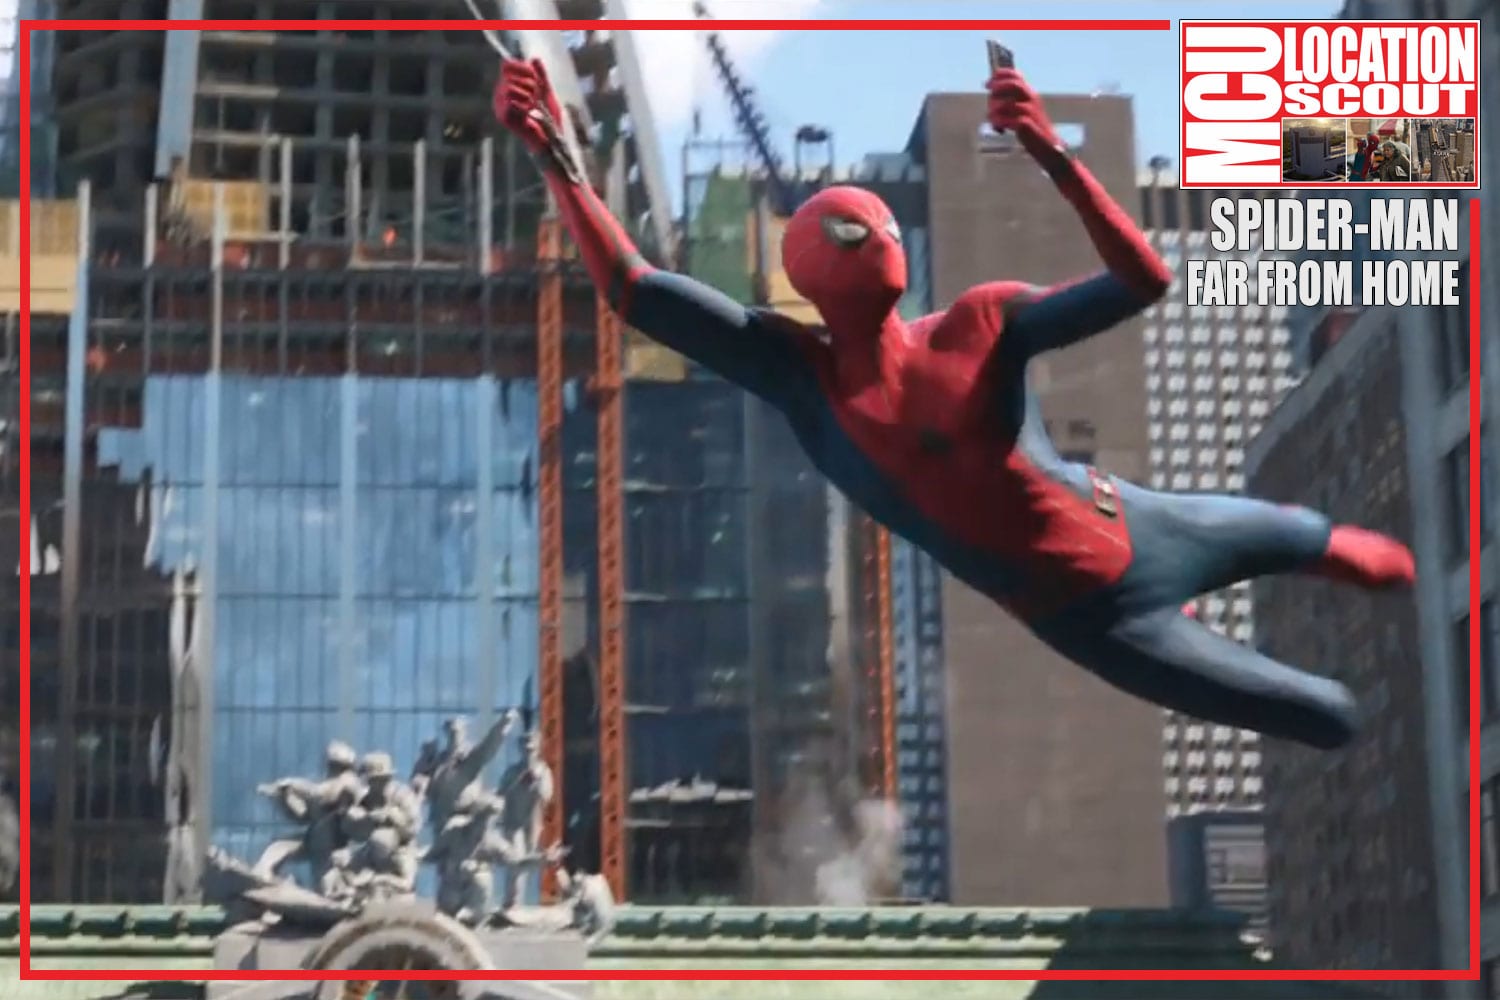 MCU: Location Scout | Spider-Man: Far From Home Trailer